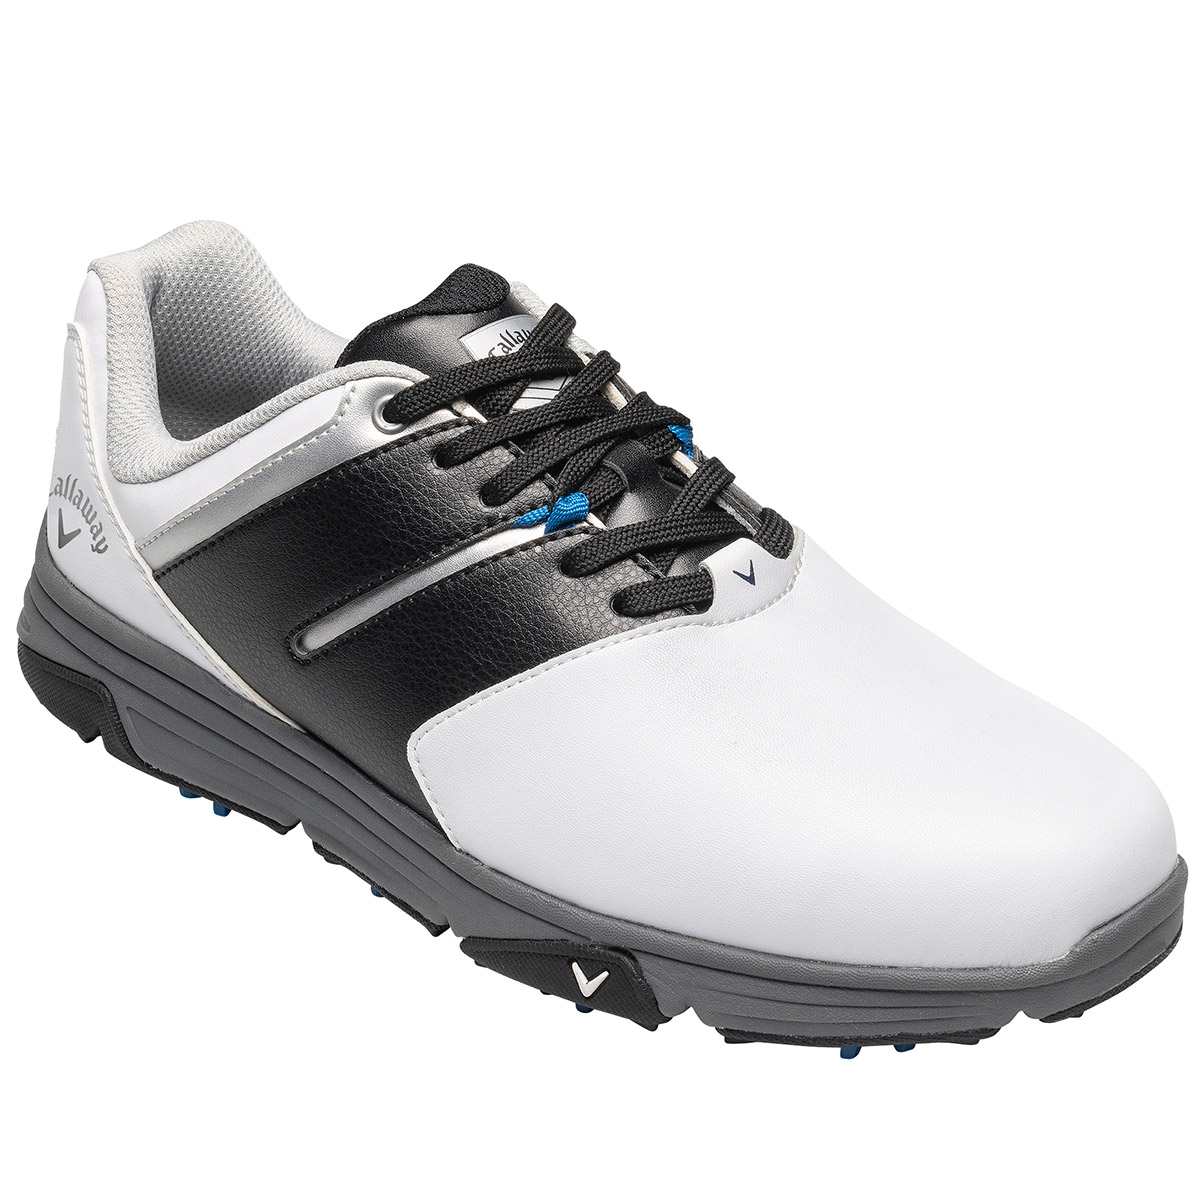 Callaway Golf Chev Mission Shoes | Online Golf